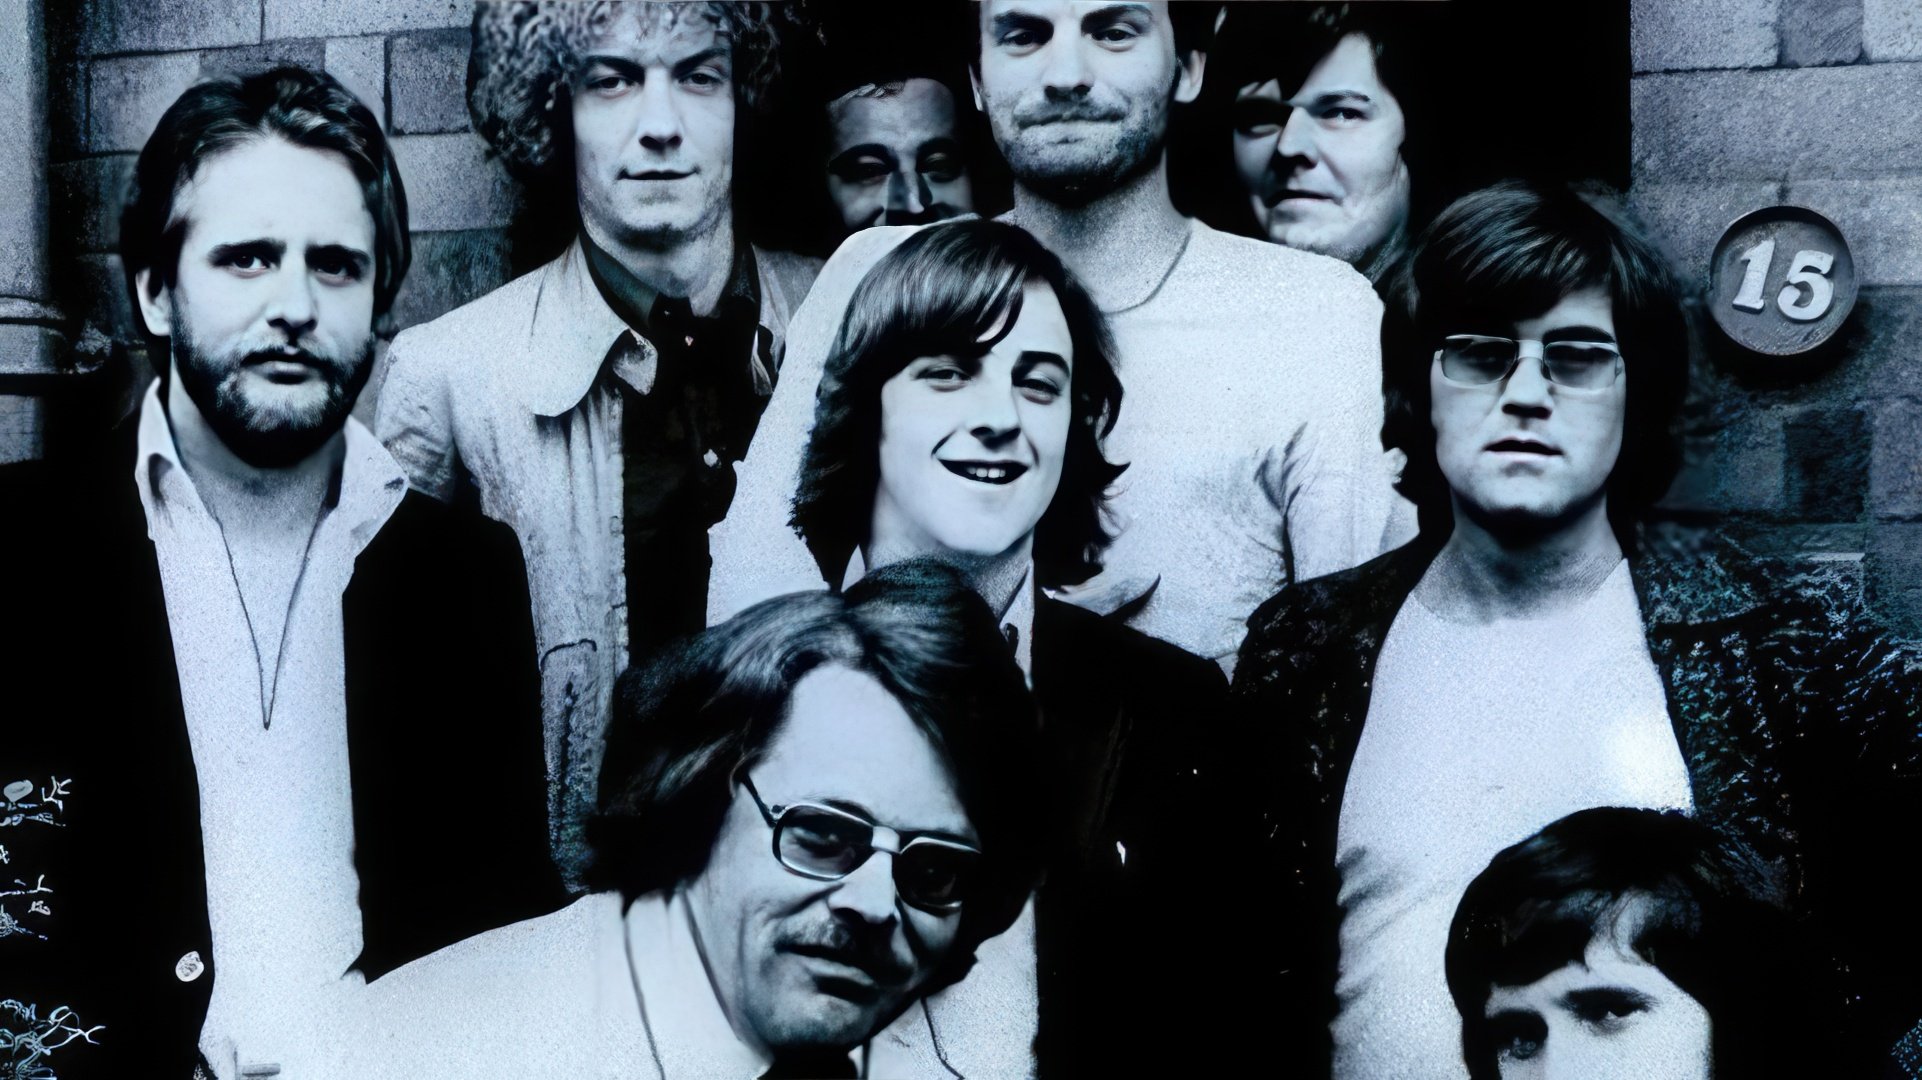 For a while, Sting was a school teacher (pictured in the top row)